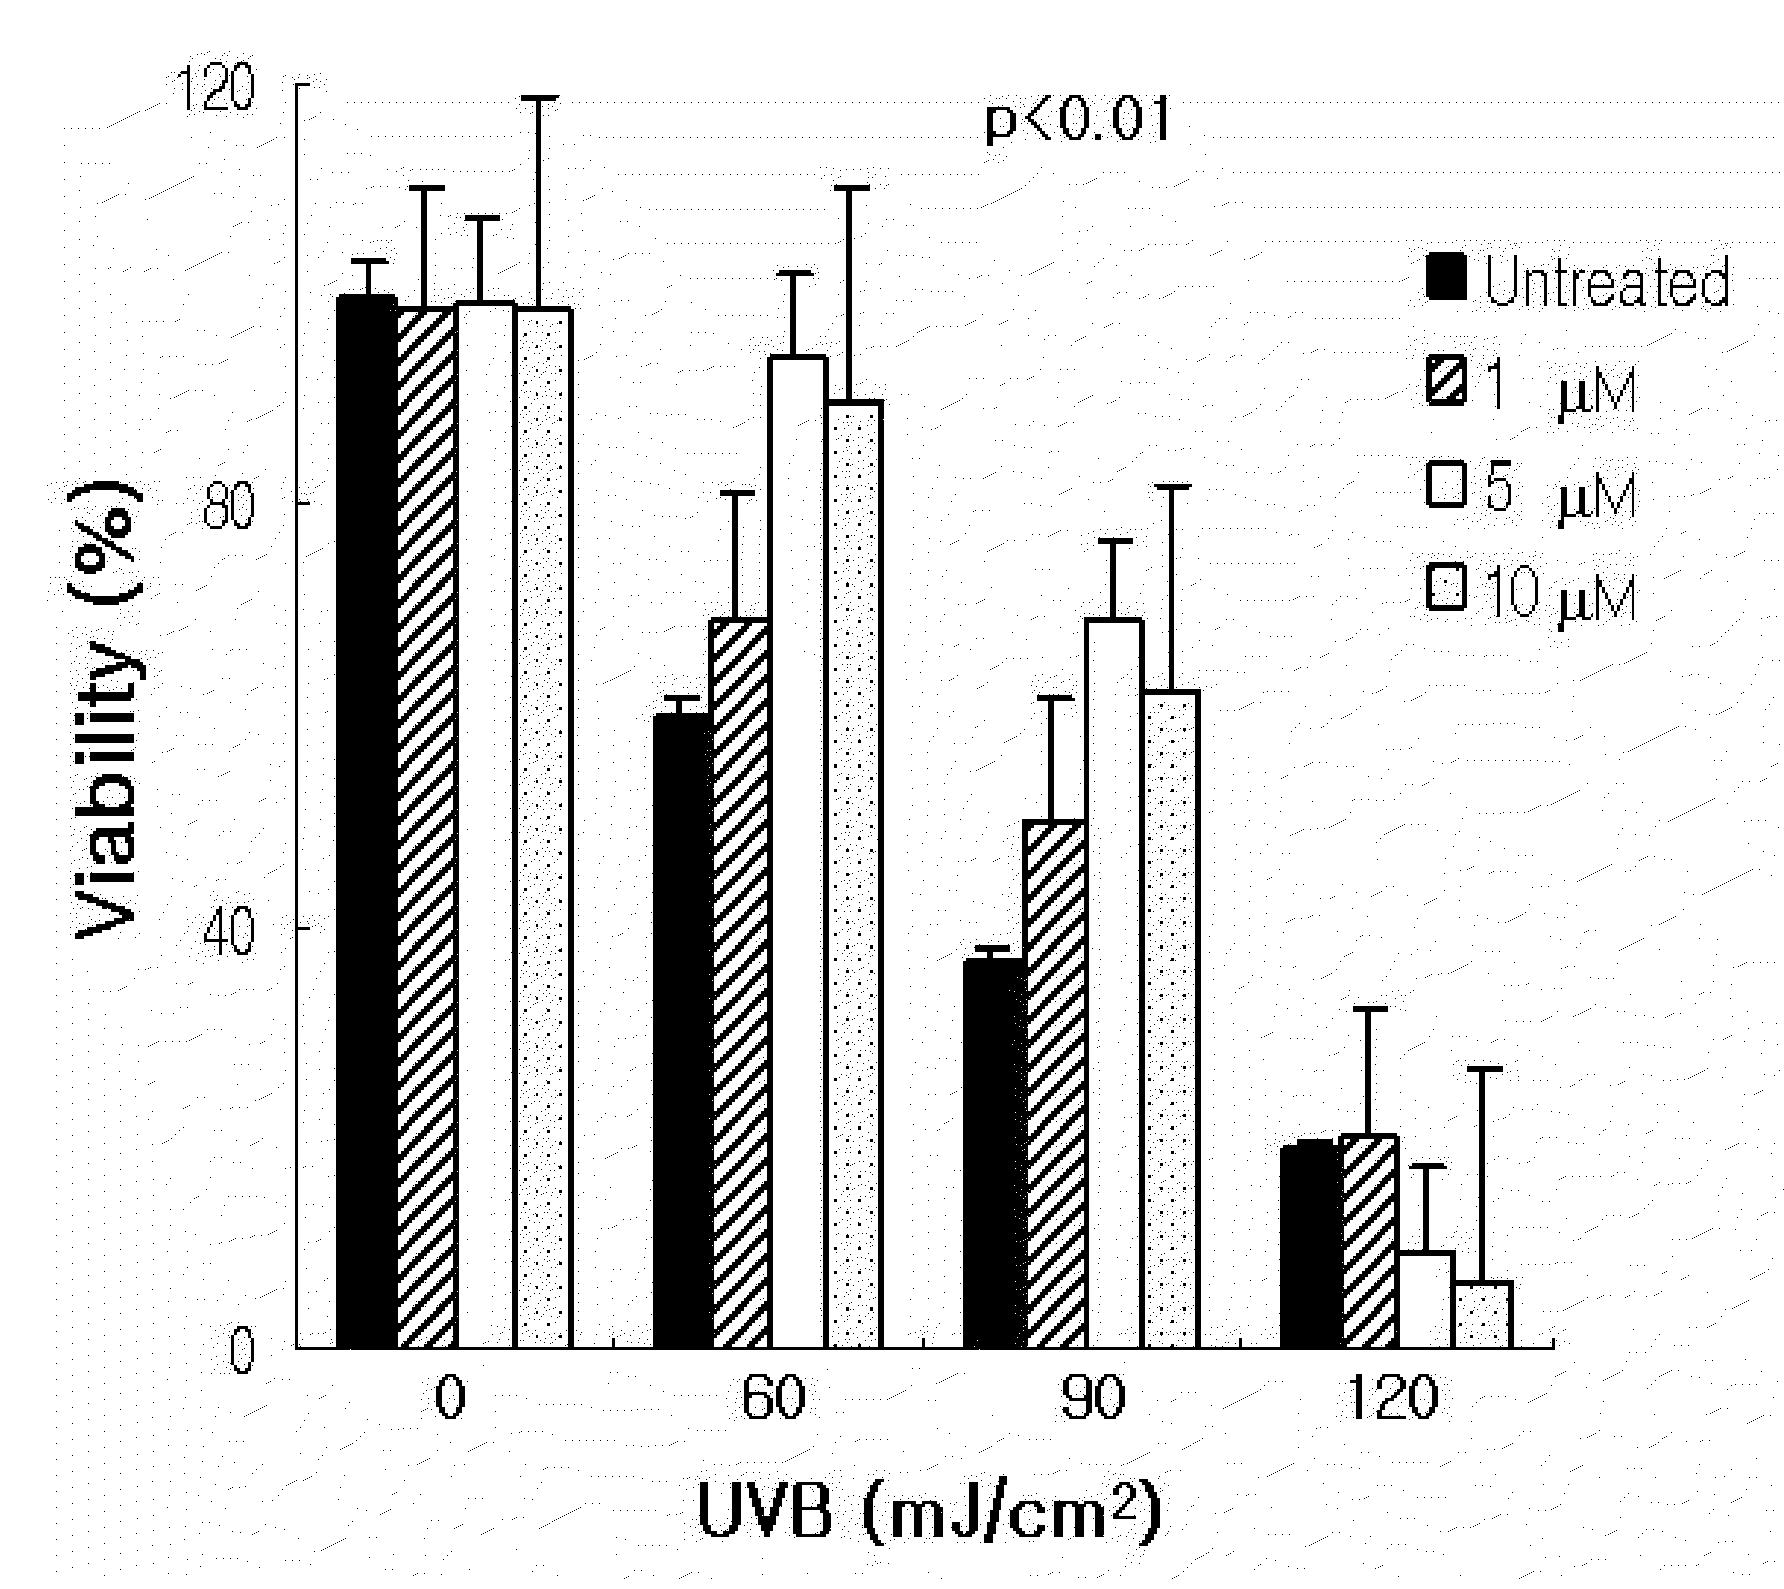 AGENT FOR CONTROLLING Bcl-2 EXPRESSION COMPRISING GINSENOSIDE F1 AS AN ACTIVE COMPONENT